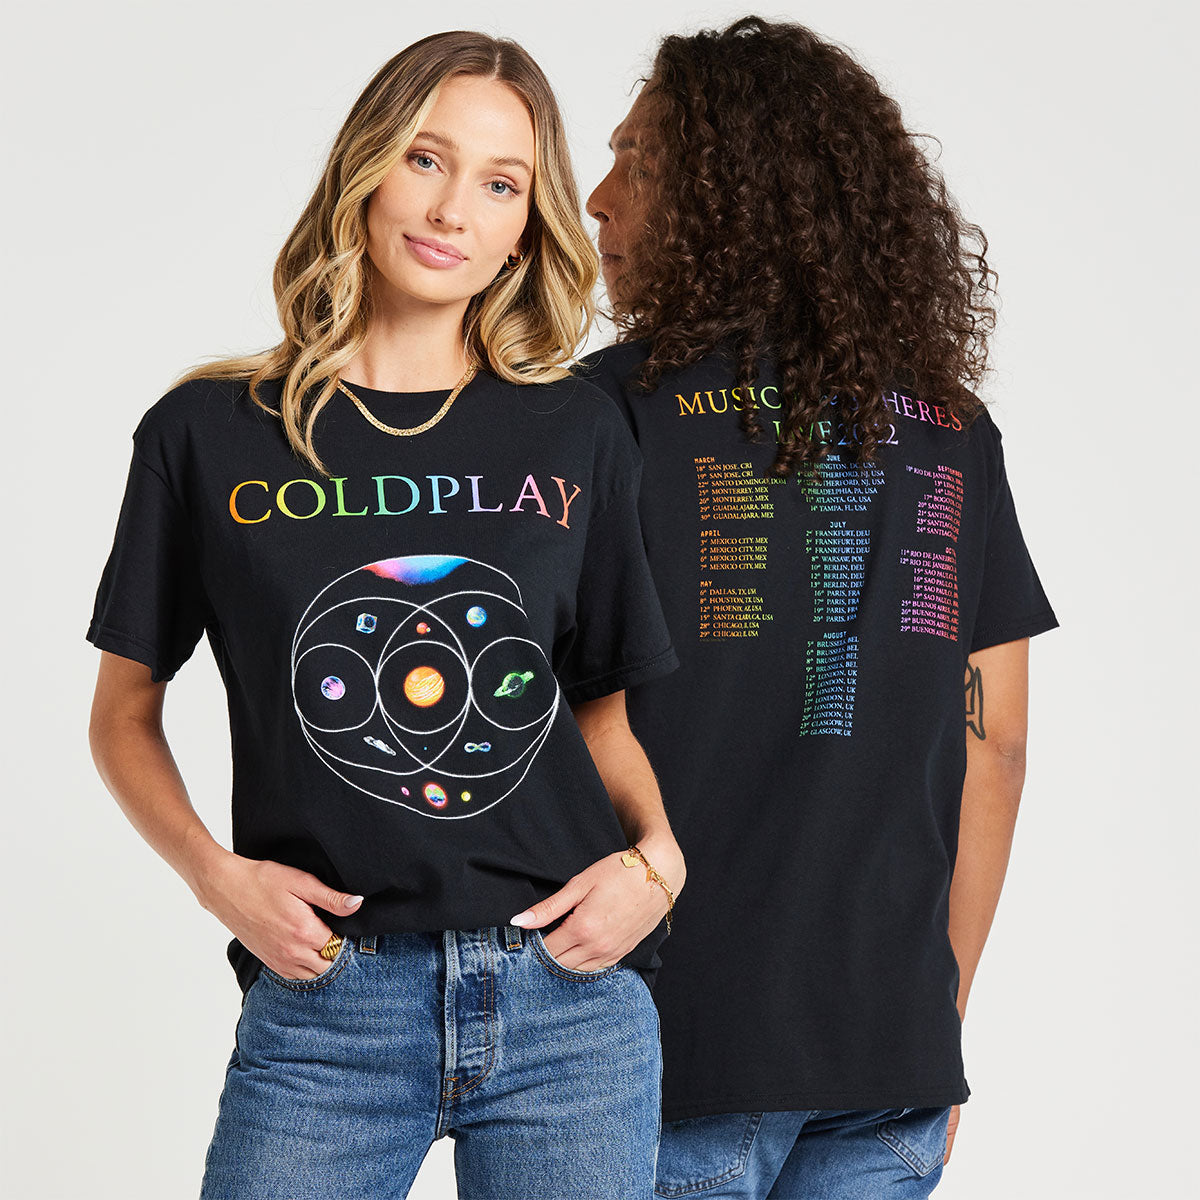 Coldplay music of the spheres ライブTシャツ-